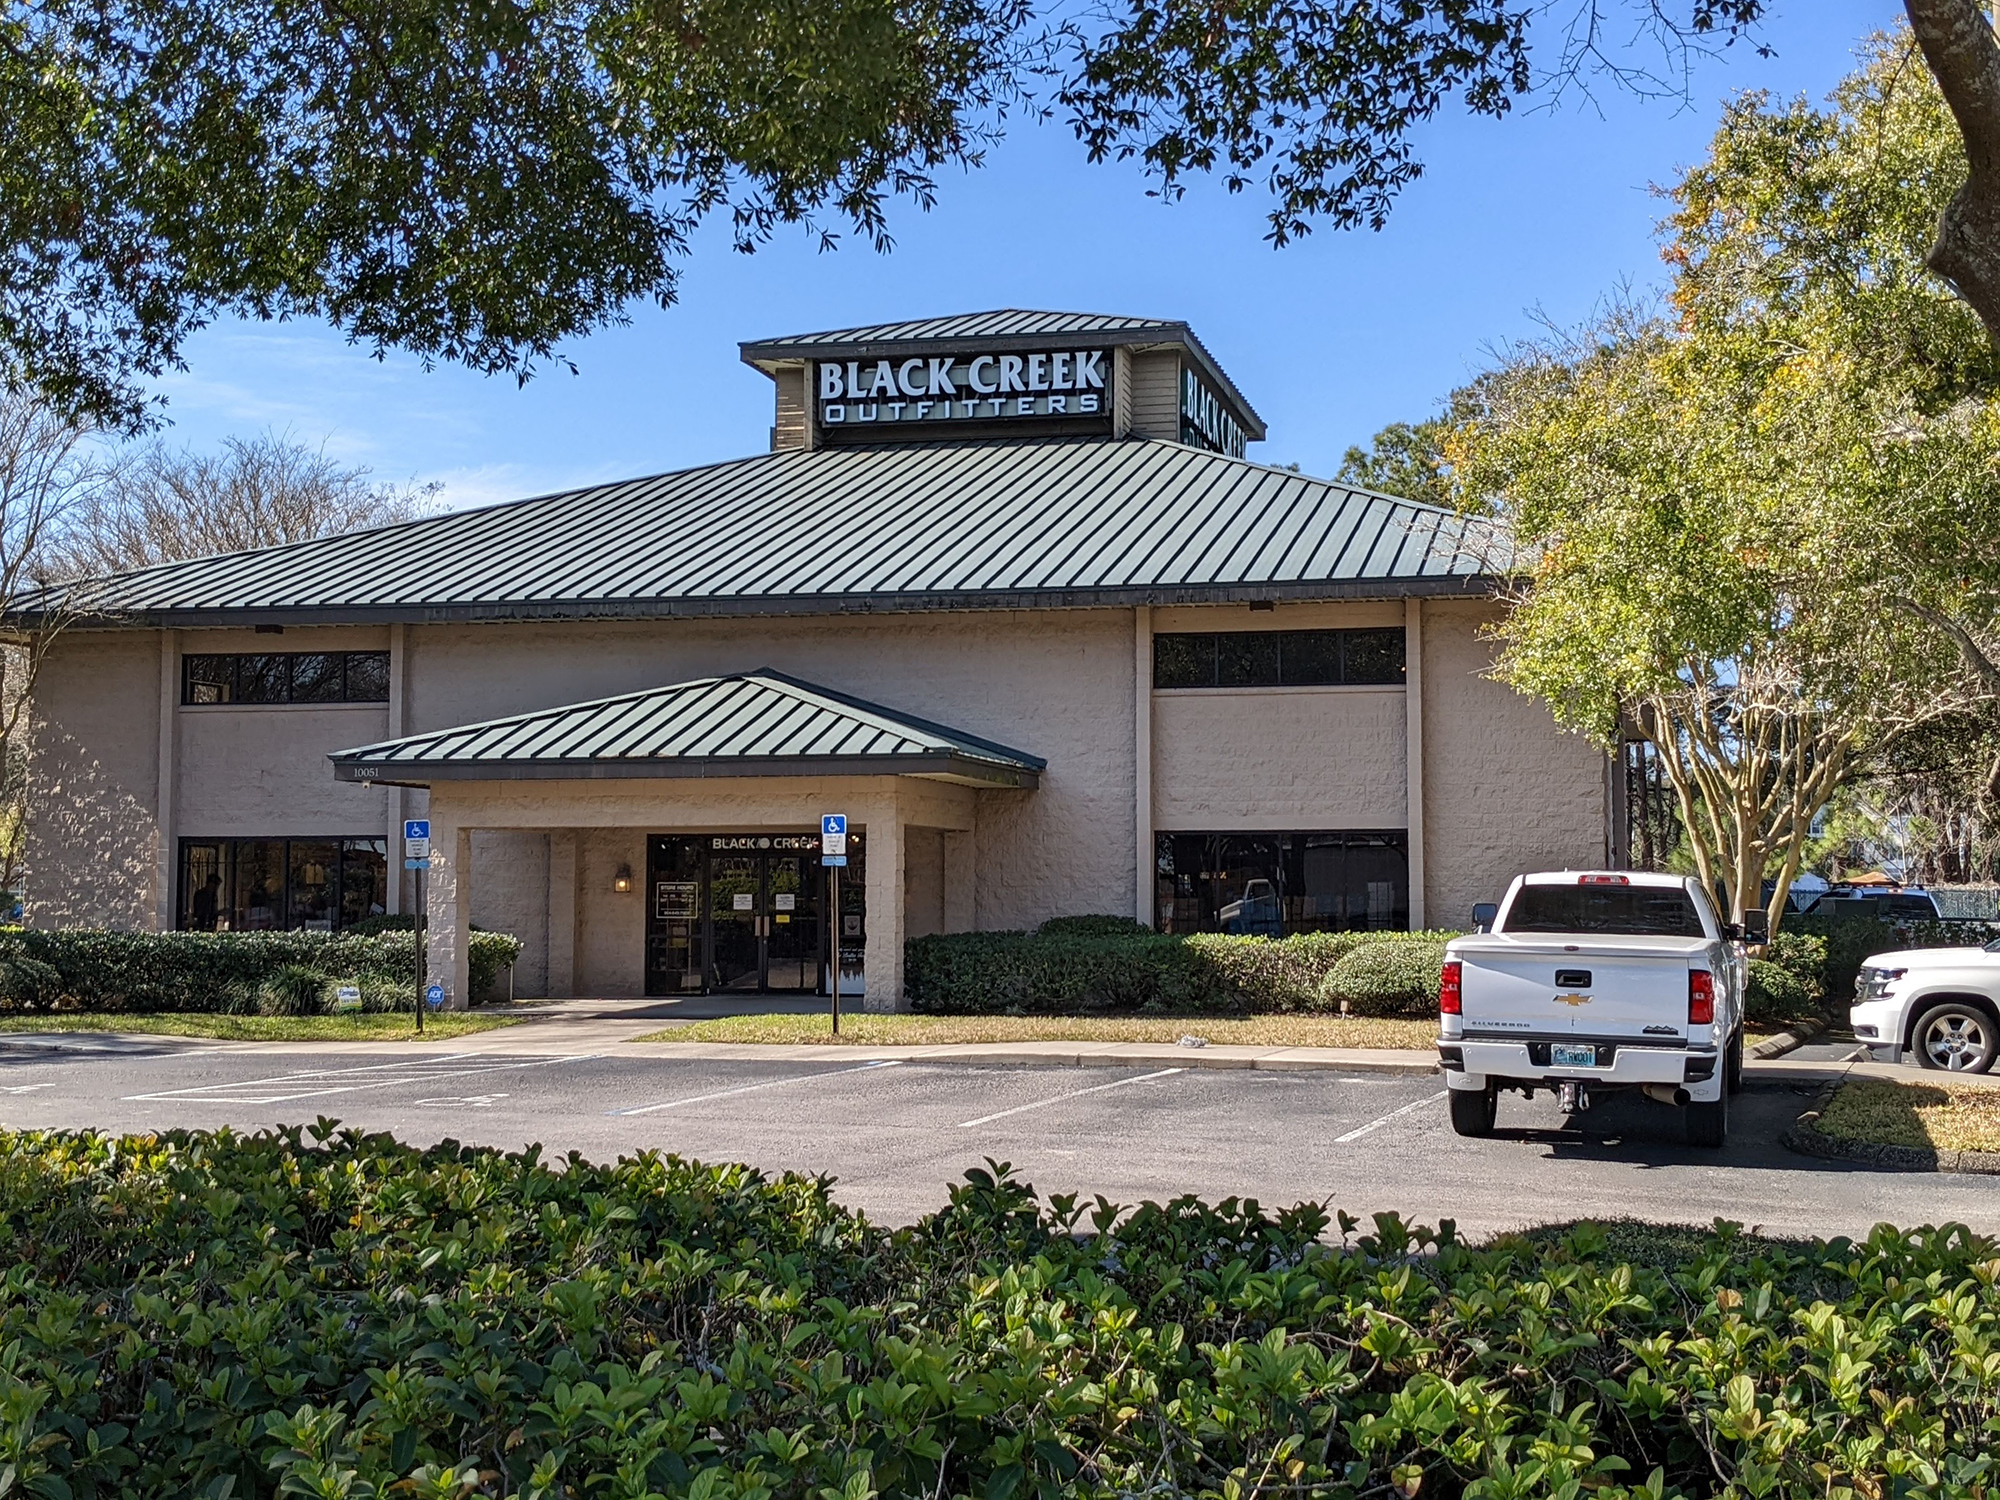 Black Creek Outfitters at 10051 Skinner Lake Dr., was built before the nearby St. Johns Town Center.